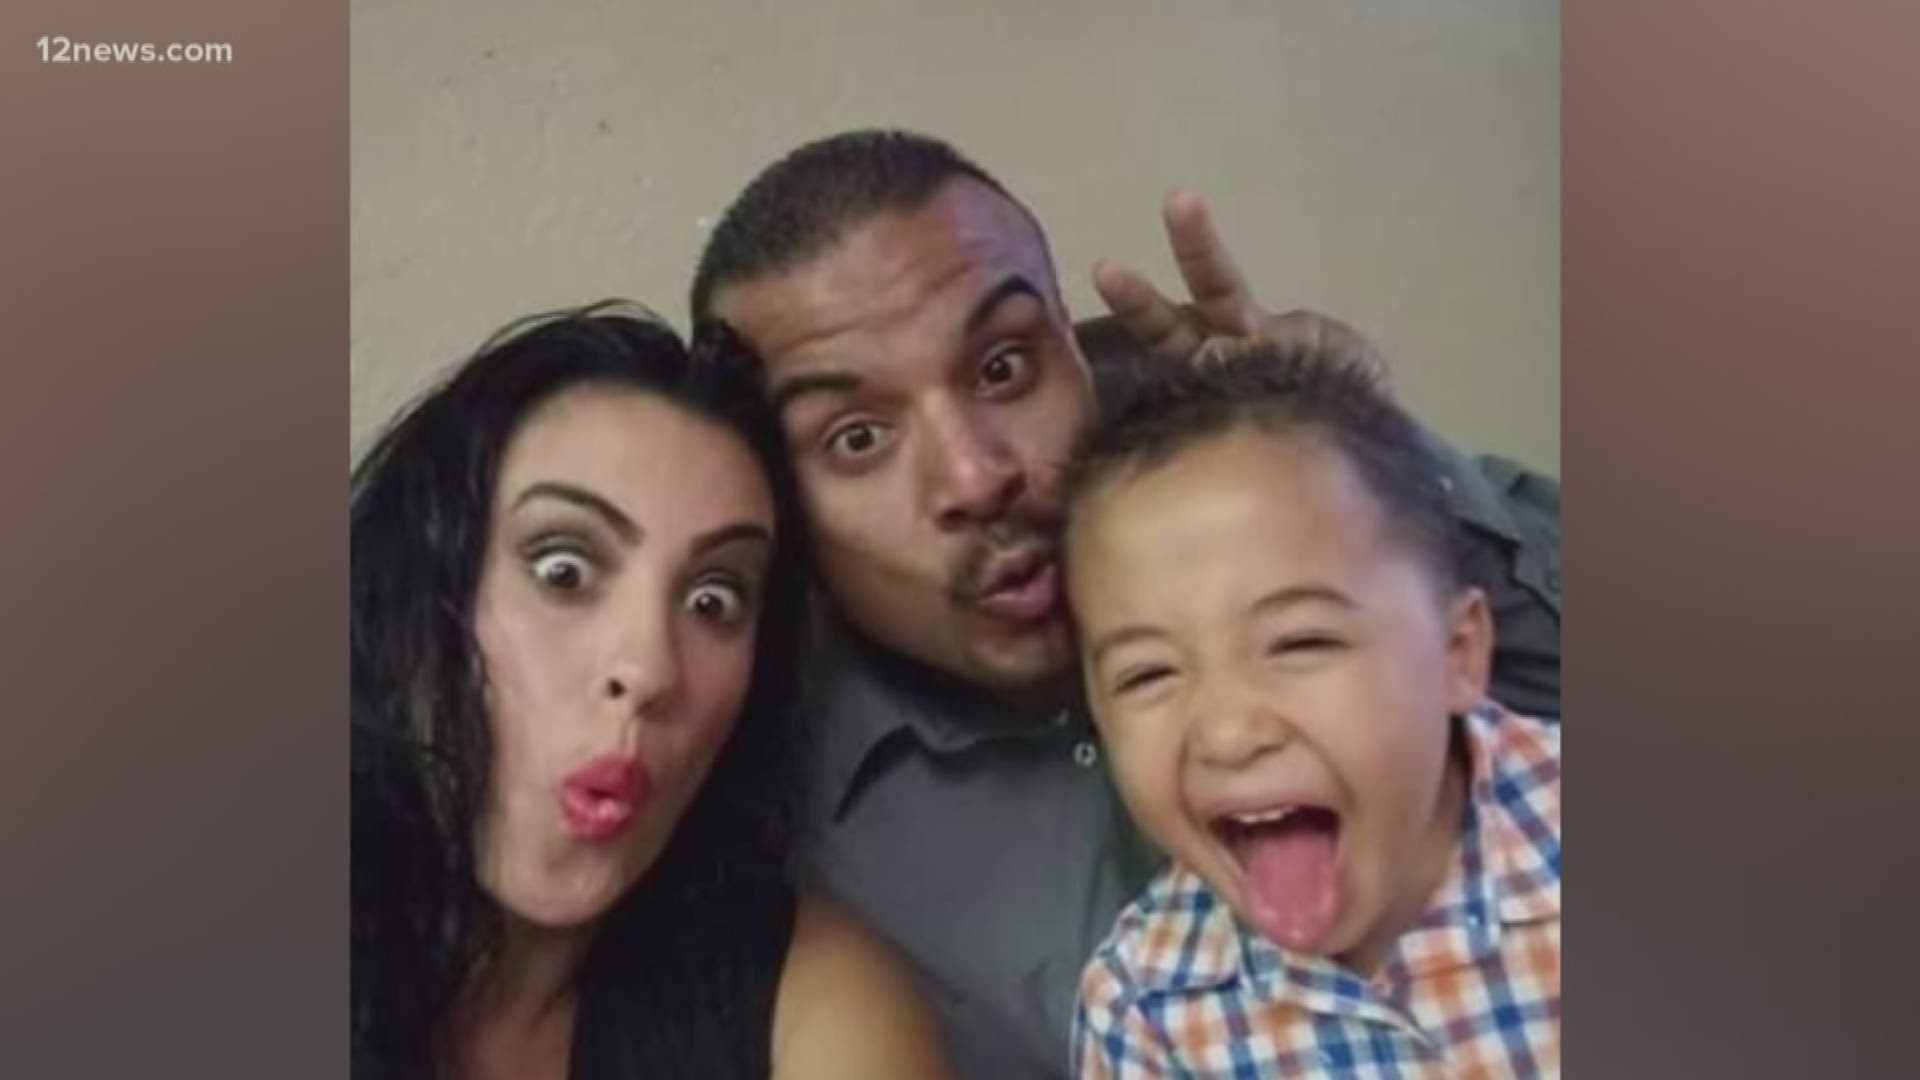 Phoenix police came to the motel where Henry Rivera and his family were staying, looking for a violent suspect wanted in connection to another crime. Instead, they found Rivera.